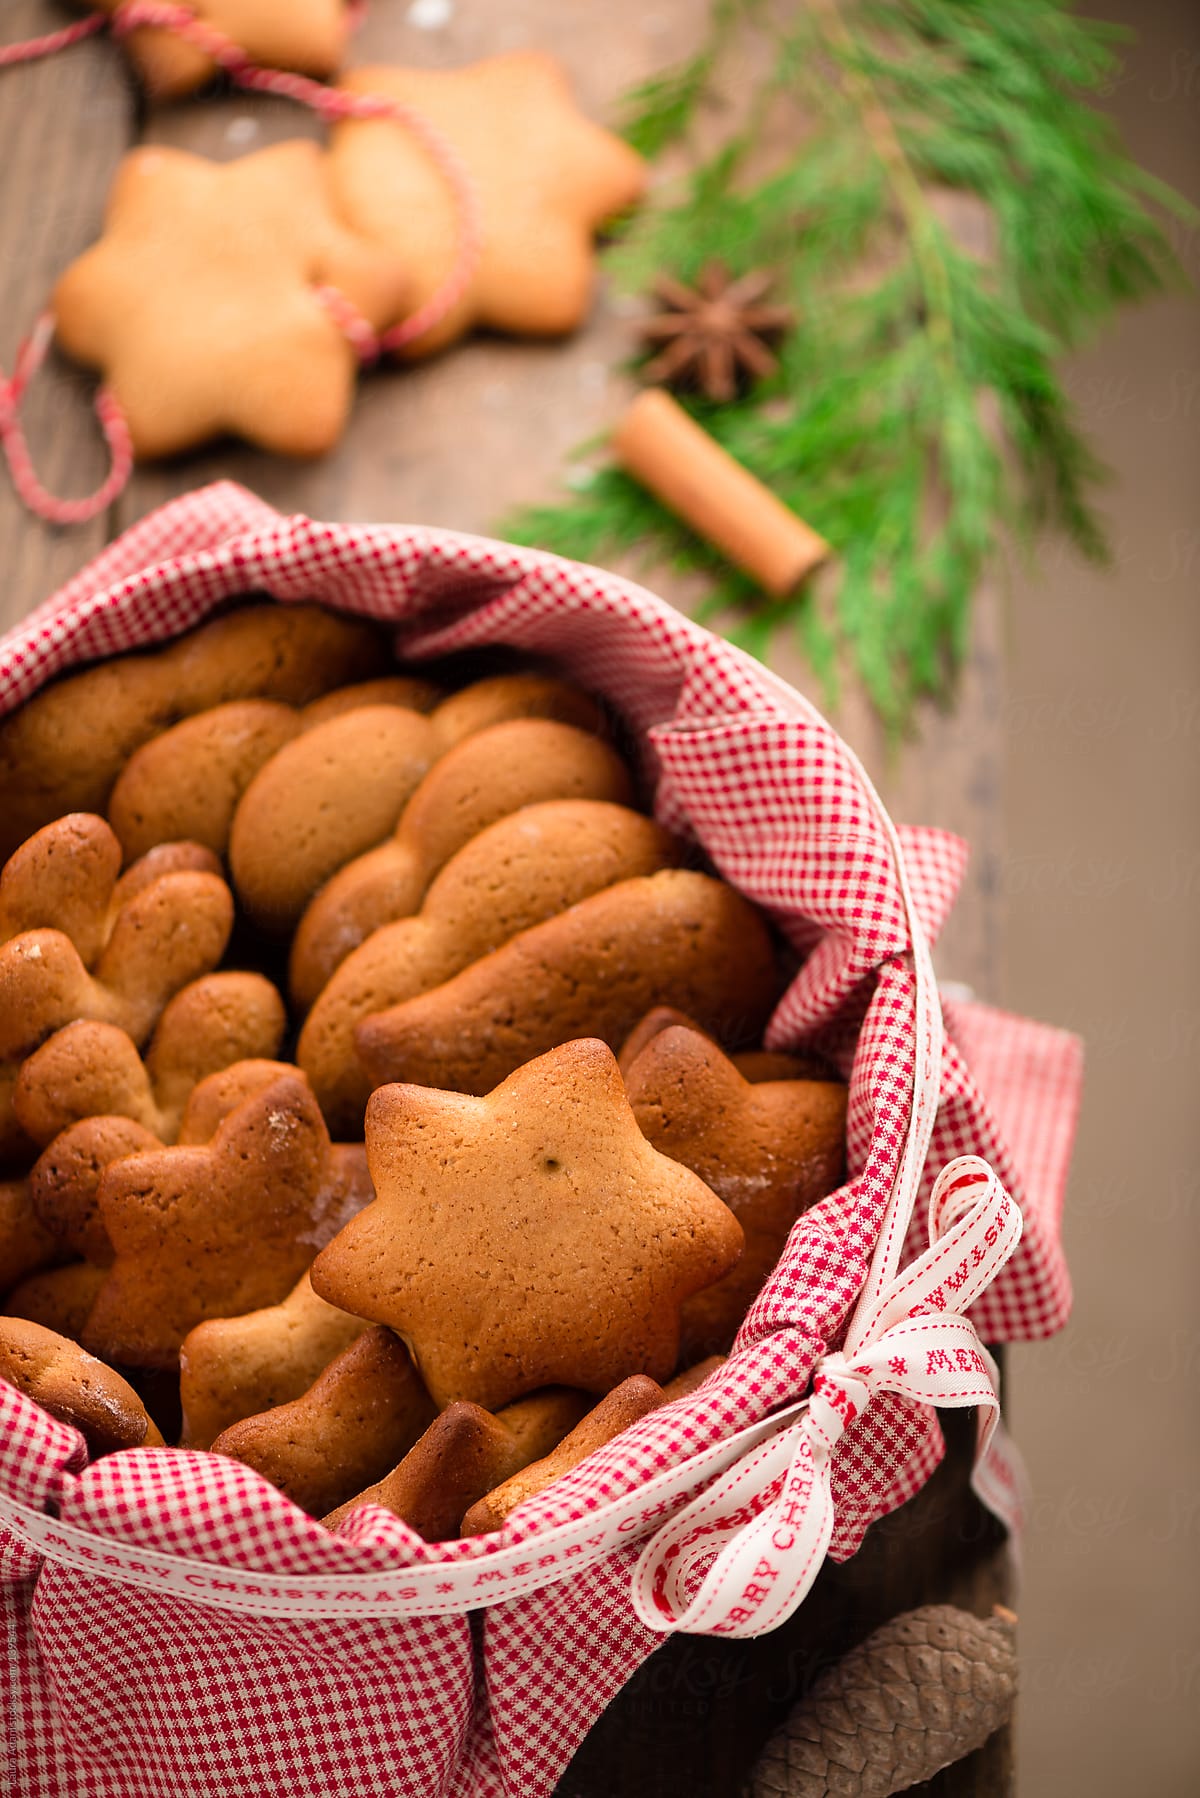 "Gingerbread Biscuits" by Stocksy Contributor "Laura Adani" - Stocksy